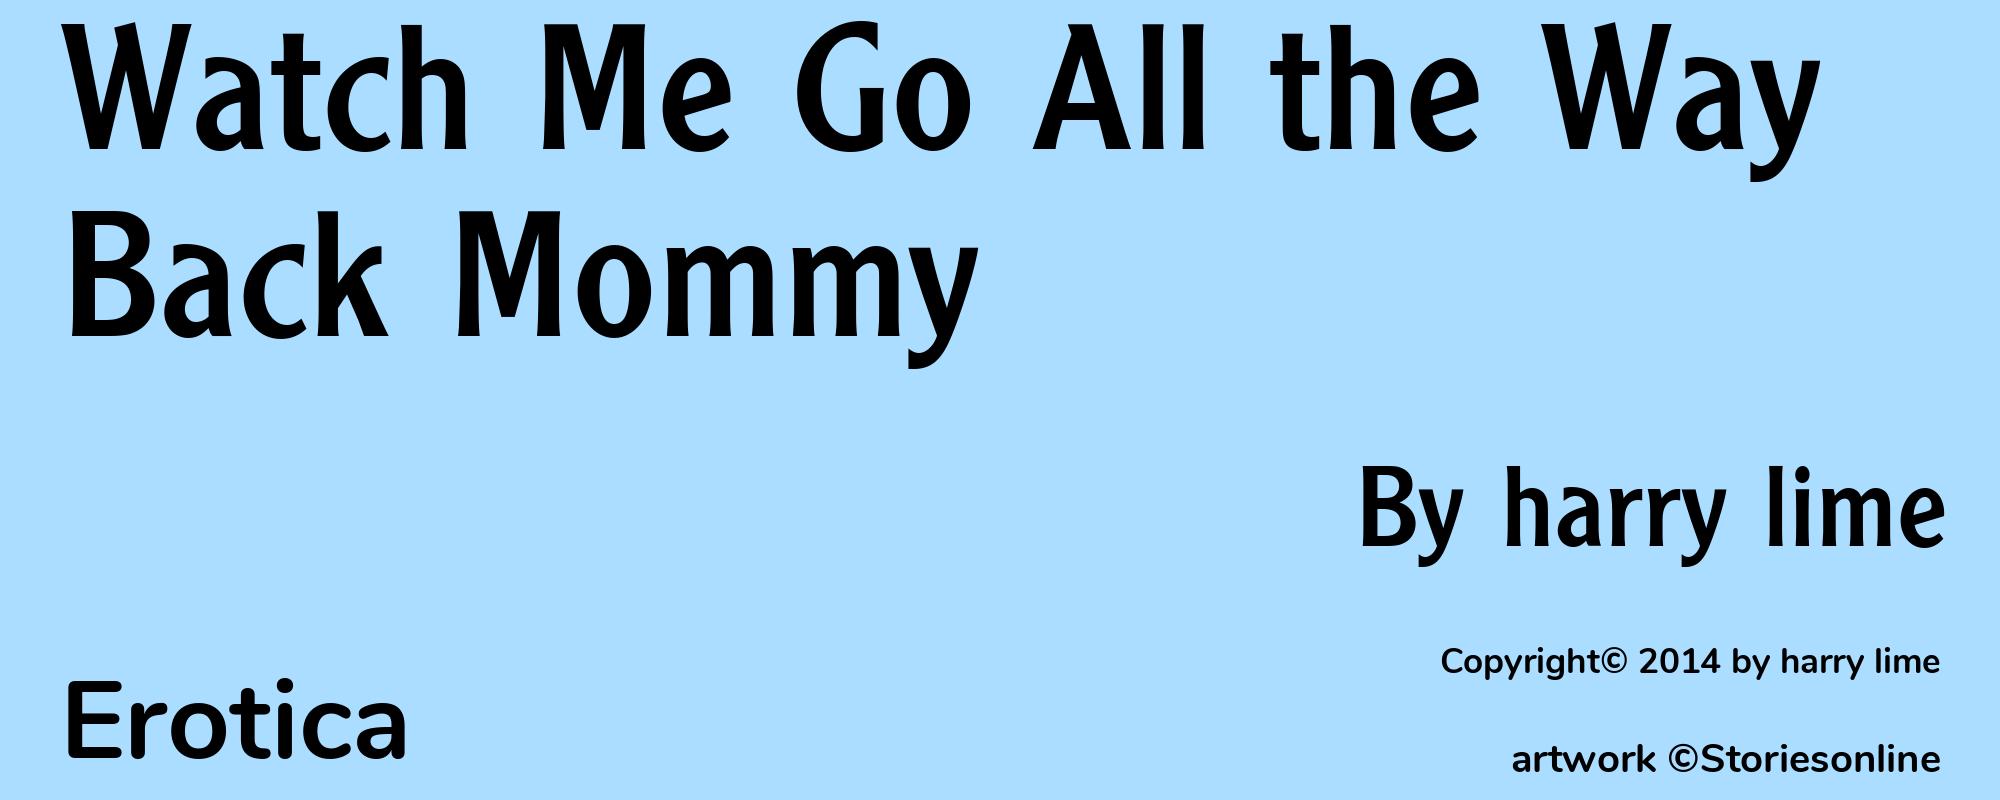 Watch Me Go All the Way Back Mommy - Cover